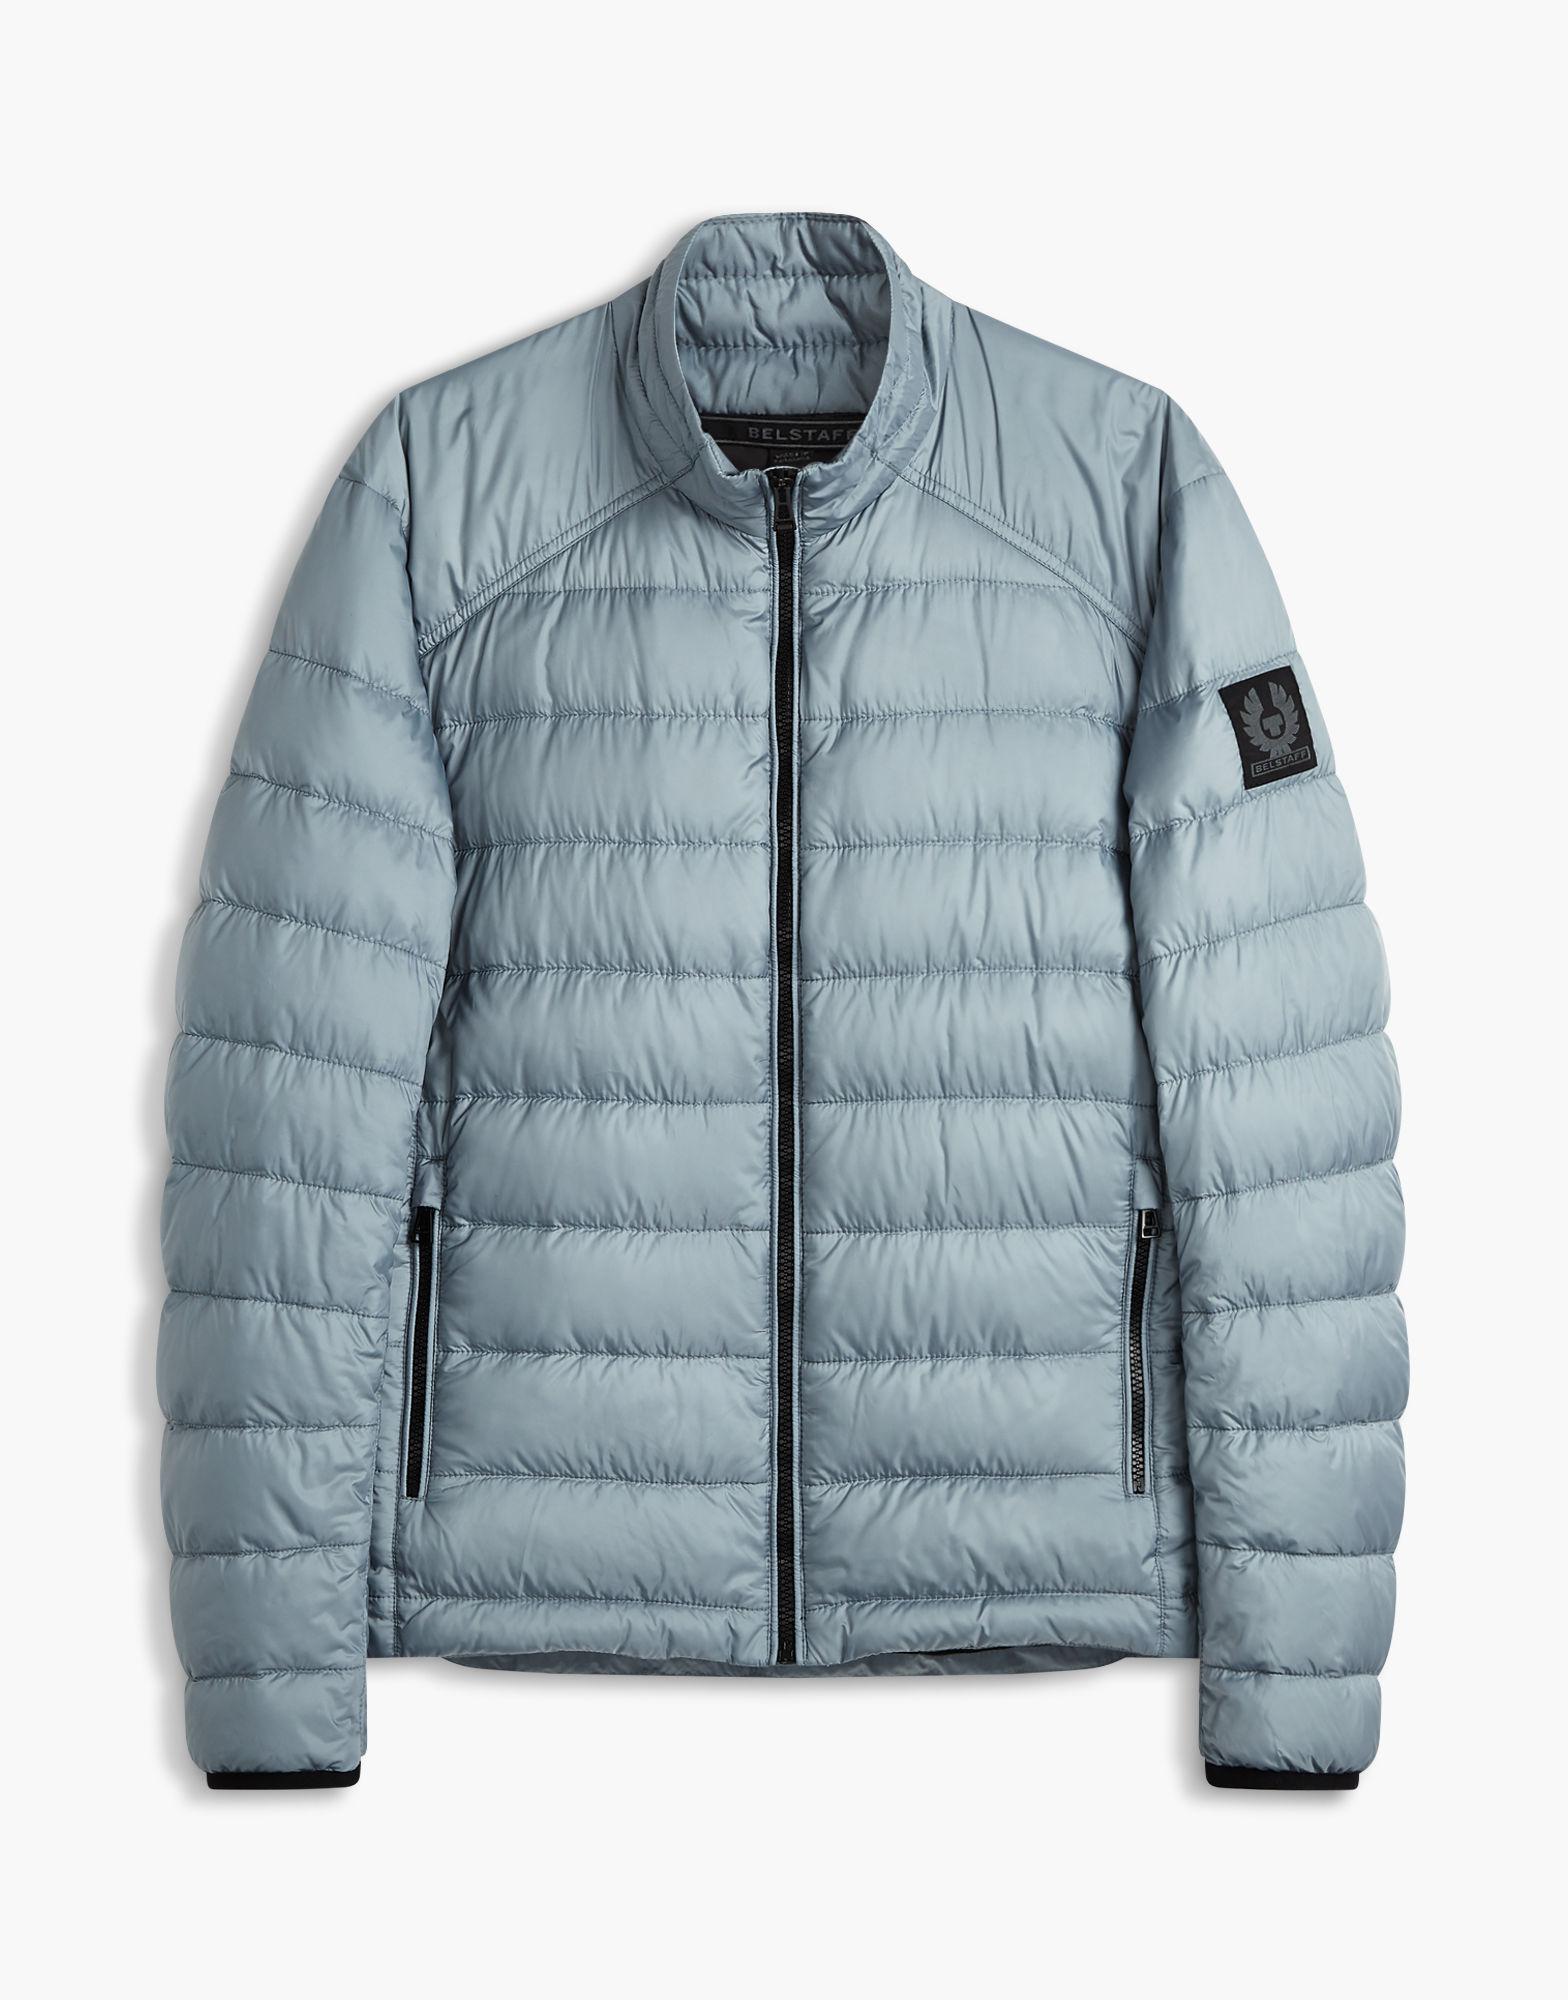 Belstaff Synthetic Ryegate Down Jacket in Light Chambray (Blue) for Men -  Lyst